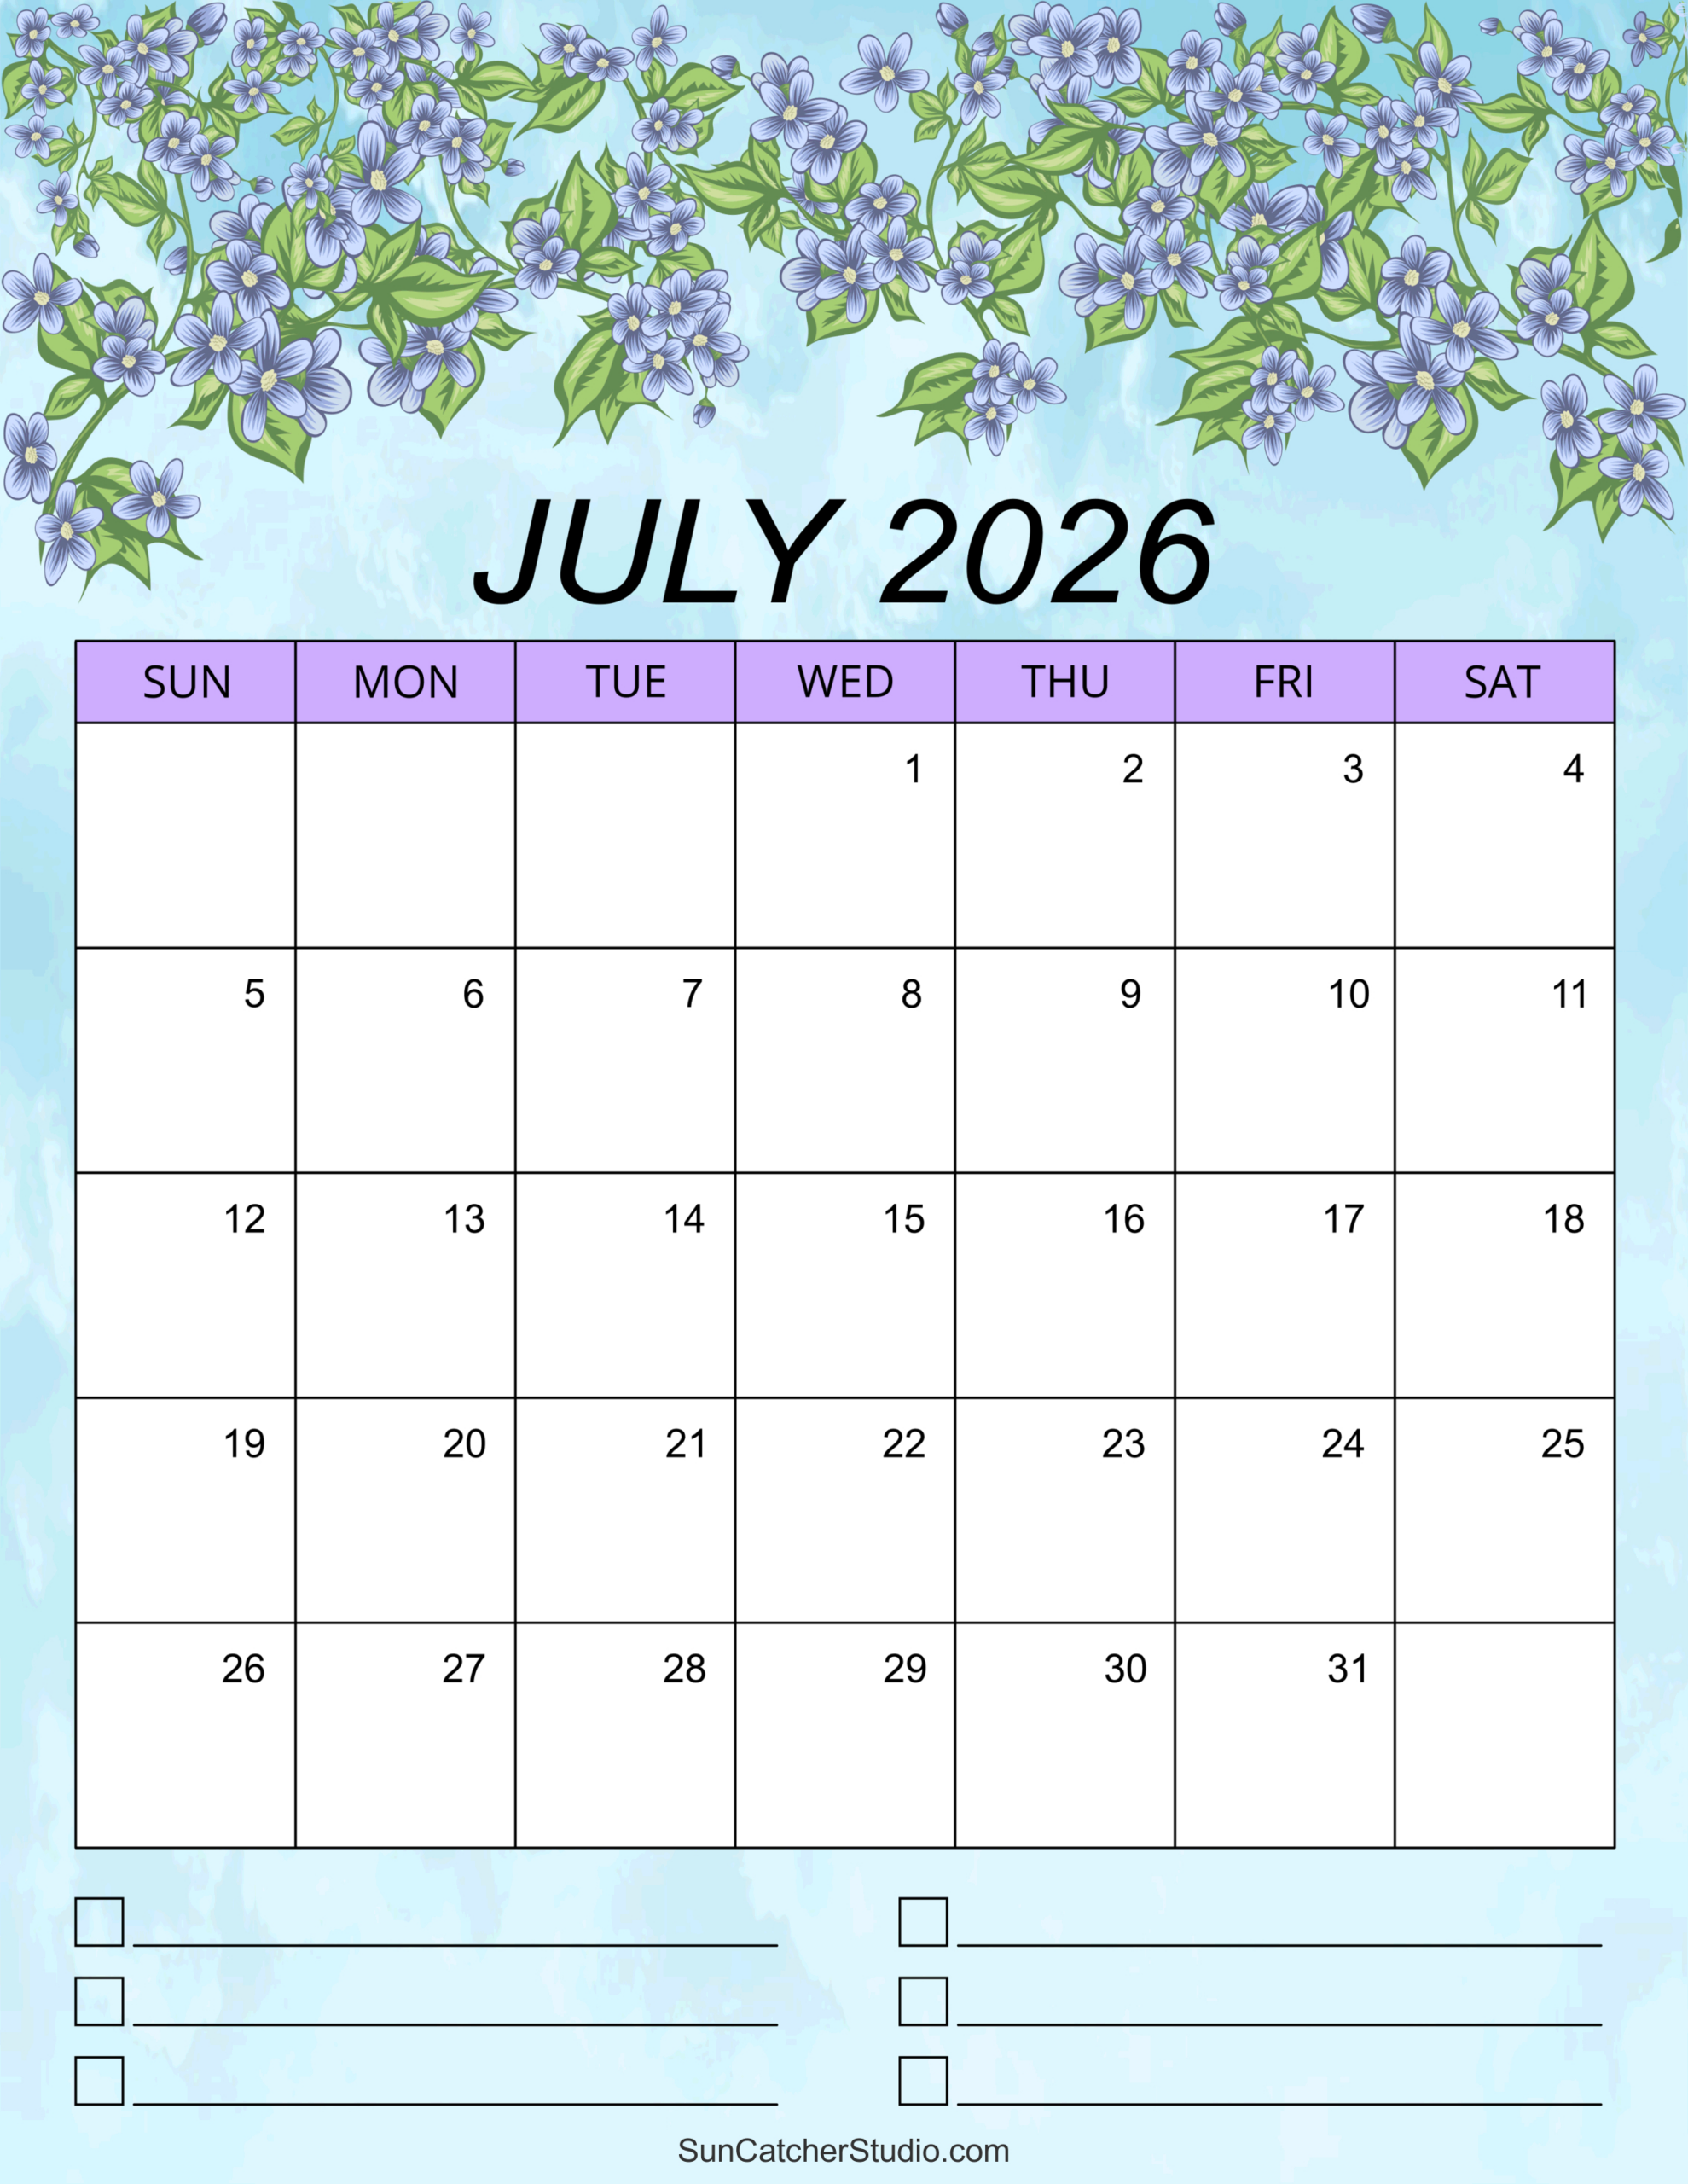 July 2026 Calendar (Free Printable) – Diy Projects, Patterns | Calendar For July 2026